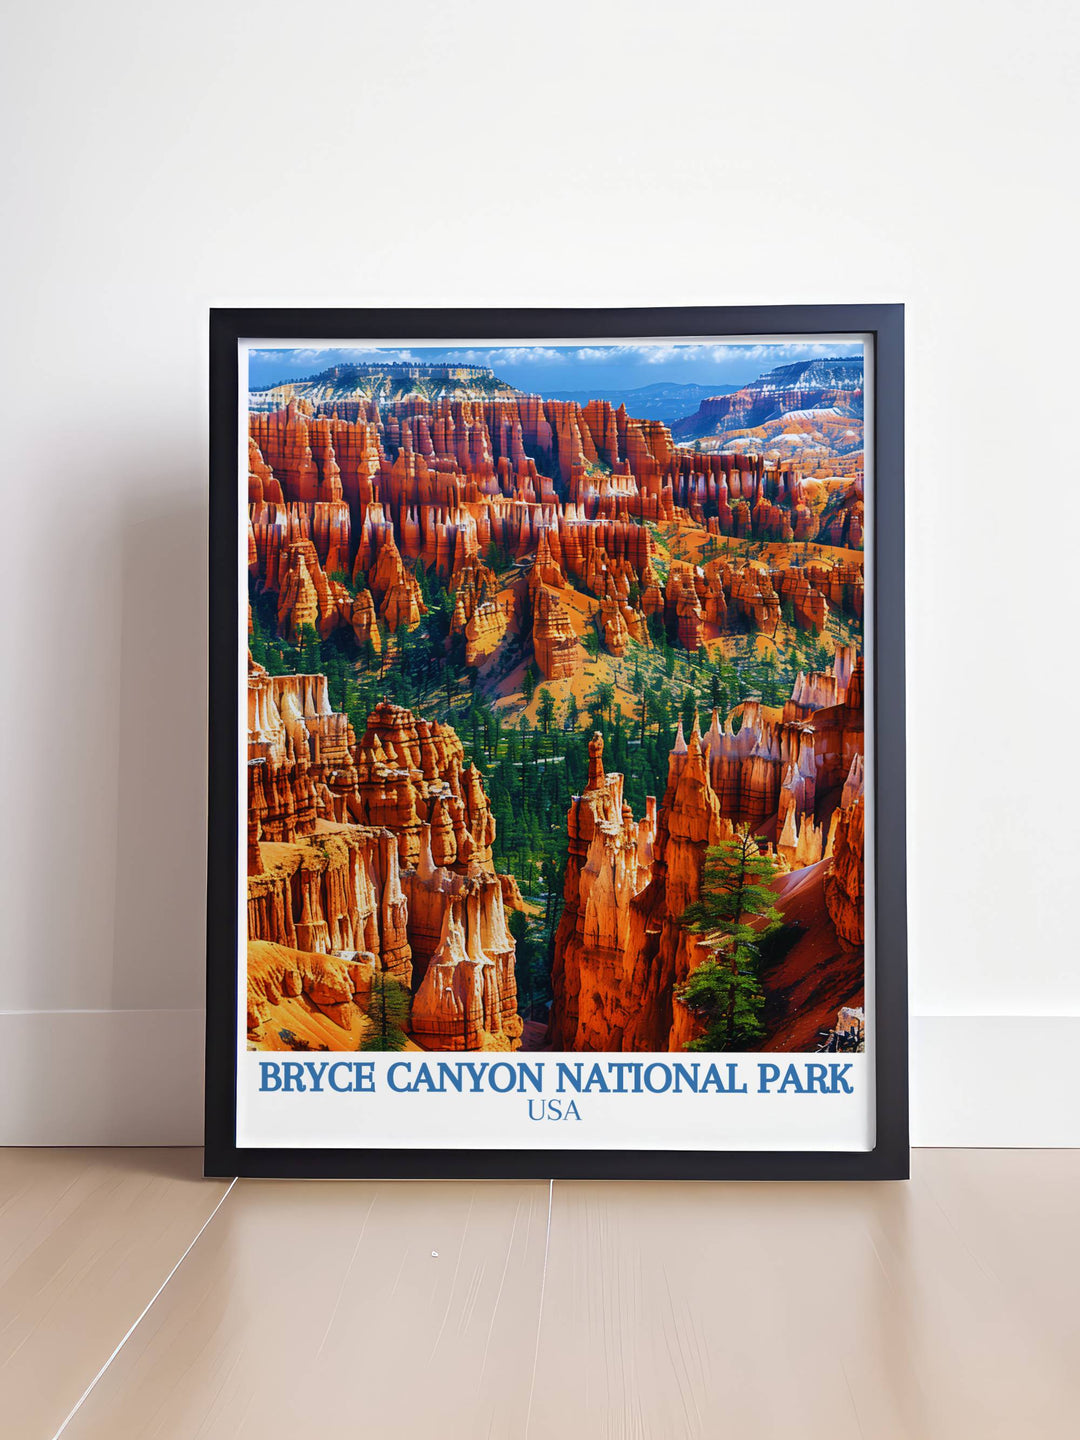 Beautiful Bryce Amphitheater artwork featuring the unique hoodoos and panoramic views of Bryce Canyon. Enhance your living space with this high quality print. Ideal for those who appreciate the great outdoors and national parks